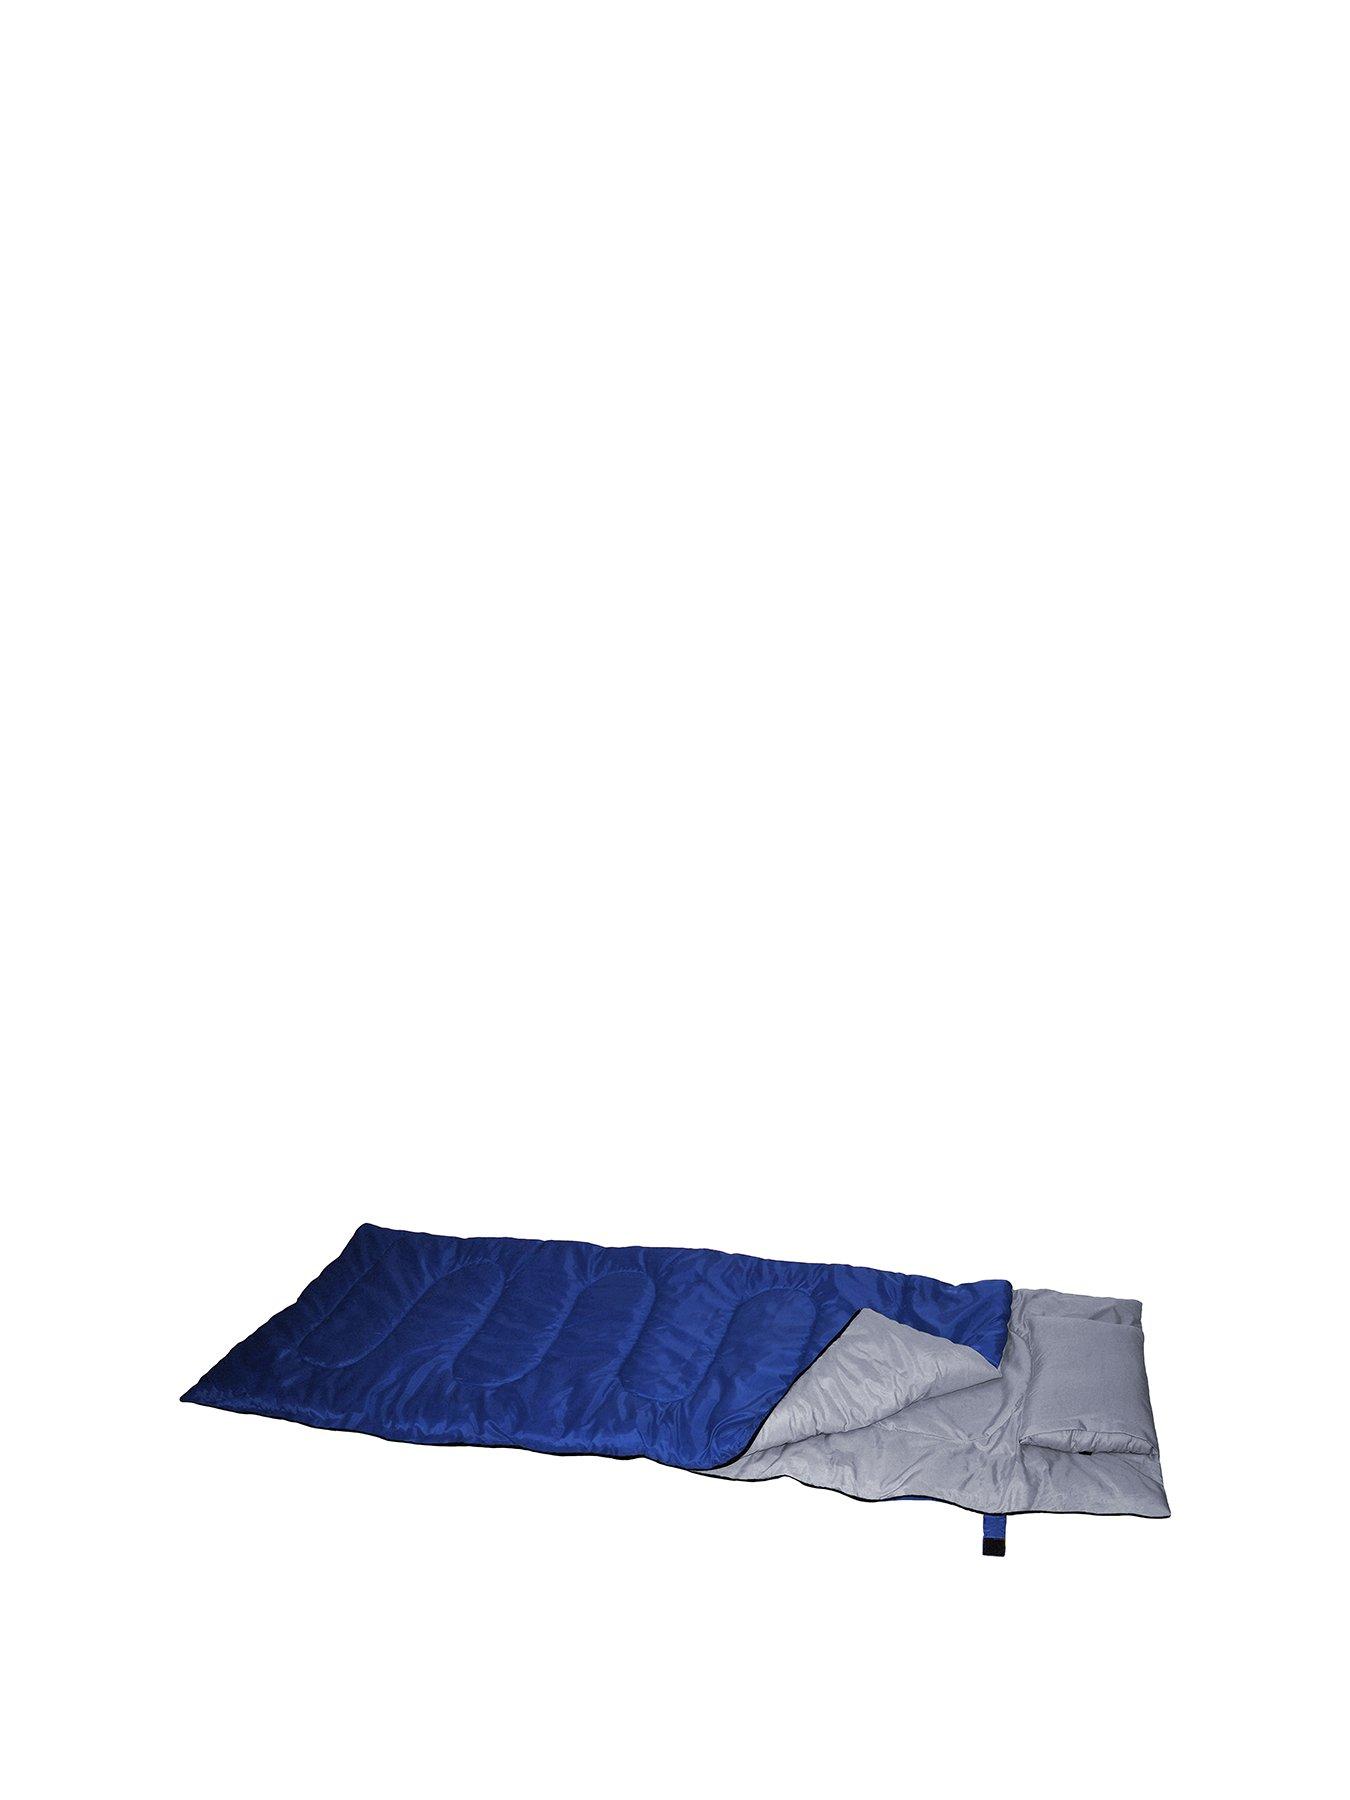 Indoor and Outdoor Air Mattress Two Persons 198 x 137 x 22 cm Camping Bed Coleman Air Bed Two Persons with Thermal Cover Comfort Double Bed Guest Bed with Removable Topper